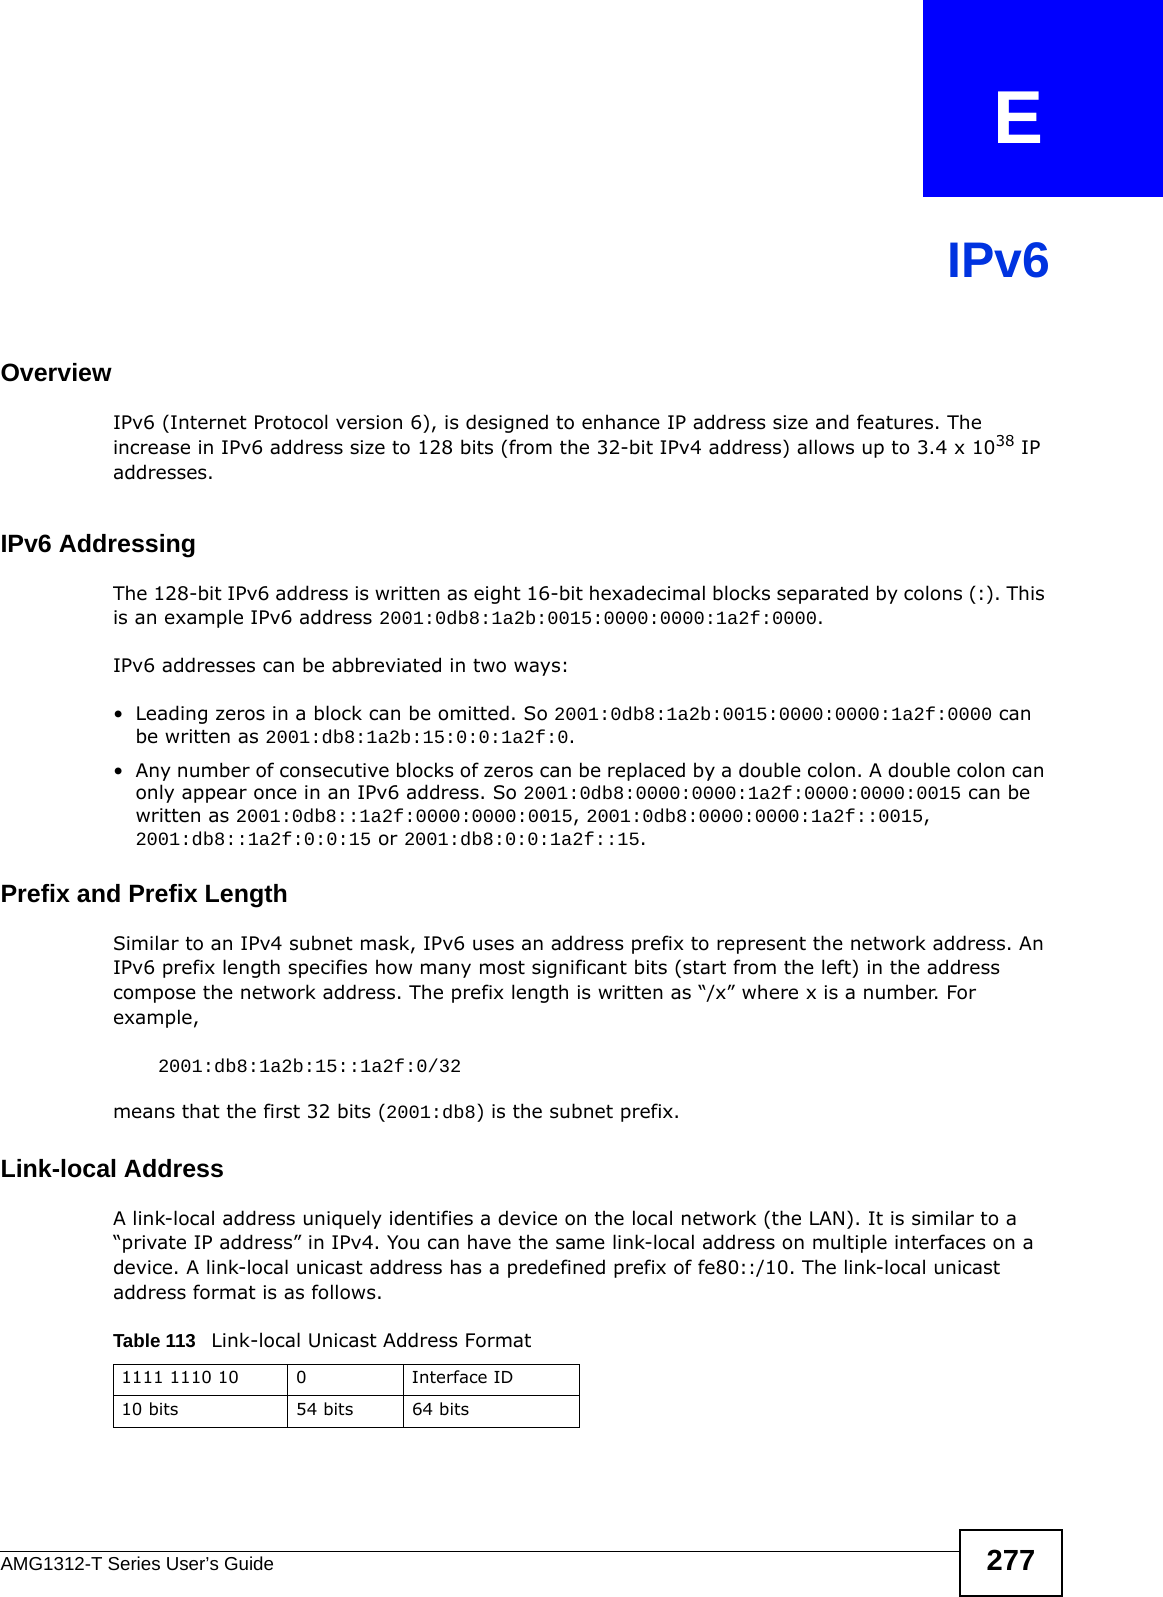 AMG1312-T Series User’s Guide 277APPENDIX   EIPv6OverviewIPv6 (Internet Protocol version 6), is designed to enhance IP address size and features. The increase in IPv6 address size to 128 bits (from the 32-bit IPv4 address) allows up to 3.4 x 1038 IP addresses. IPv6 AddressingThe 128-bit IPv6 address is written as eight 16-bit hexadecimal blocks separated by colons (:). This is an example IPv6 address 2001:0db8:1a2b:0015:0000:0000:1a2f:0000. IPv6 addresses can be abbreviated in two ways:• Leading zeros in a block can be omitted. So 2001:0db8:1a2b:0015:0000:0000:1a2f:0000 can be written as 2001:db8:1a2b:15:0:0:1a2f:0. • Any number of consecutive blocks of zeros can be replaced by a double colon. A double colon can only appear once in an IPv6 address. So 2001:0db8:0000:0000:1a2f:0000:0000:0015 can be written as 2001:0db8::1a2f:0000:0000:0015, 2001:0db8:0000:0000:1a2f::0015, 2001:db8::1a2f:0:0:15 or 2001:db8:0:0:1a2f::15.Prefix and Prefix LengthSimilar to an IPv4 subnet mask, IPv6 uses an address prefix to represent the network address. An IPv6 prefix length specifies how many most significant bits (start from the left) in the address compose the network address. The prefix length is written as “/x” where x is a number. For example, 2001:db8:1a2b:15::1a2f:0/32means that the first 32 bits (2001:db8) is the subnet prefix. Link-local AddressA link-local address uniquely identifies a device on the local network (the LAN). It is similar to a “private IP address” in IPv4. You can have the same link-local address on multiple interfaces on a device. A link-local unicast address has a predefined prefix of fe80::/10. The link-local unicast address format is as follows.Table 113   Link-local Unicast Address Format1111 1110 10 0 Interface ID10 bits 54 bits 64 bits